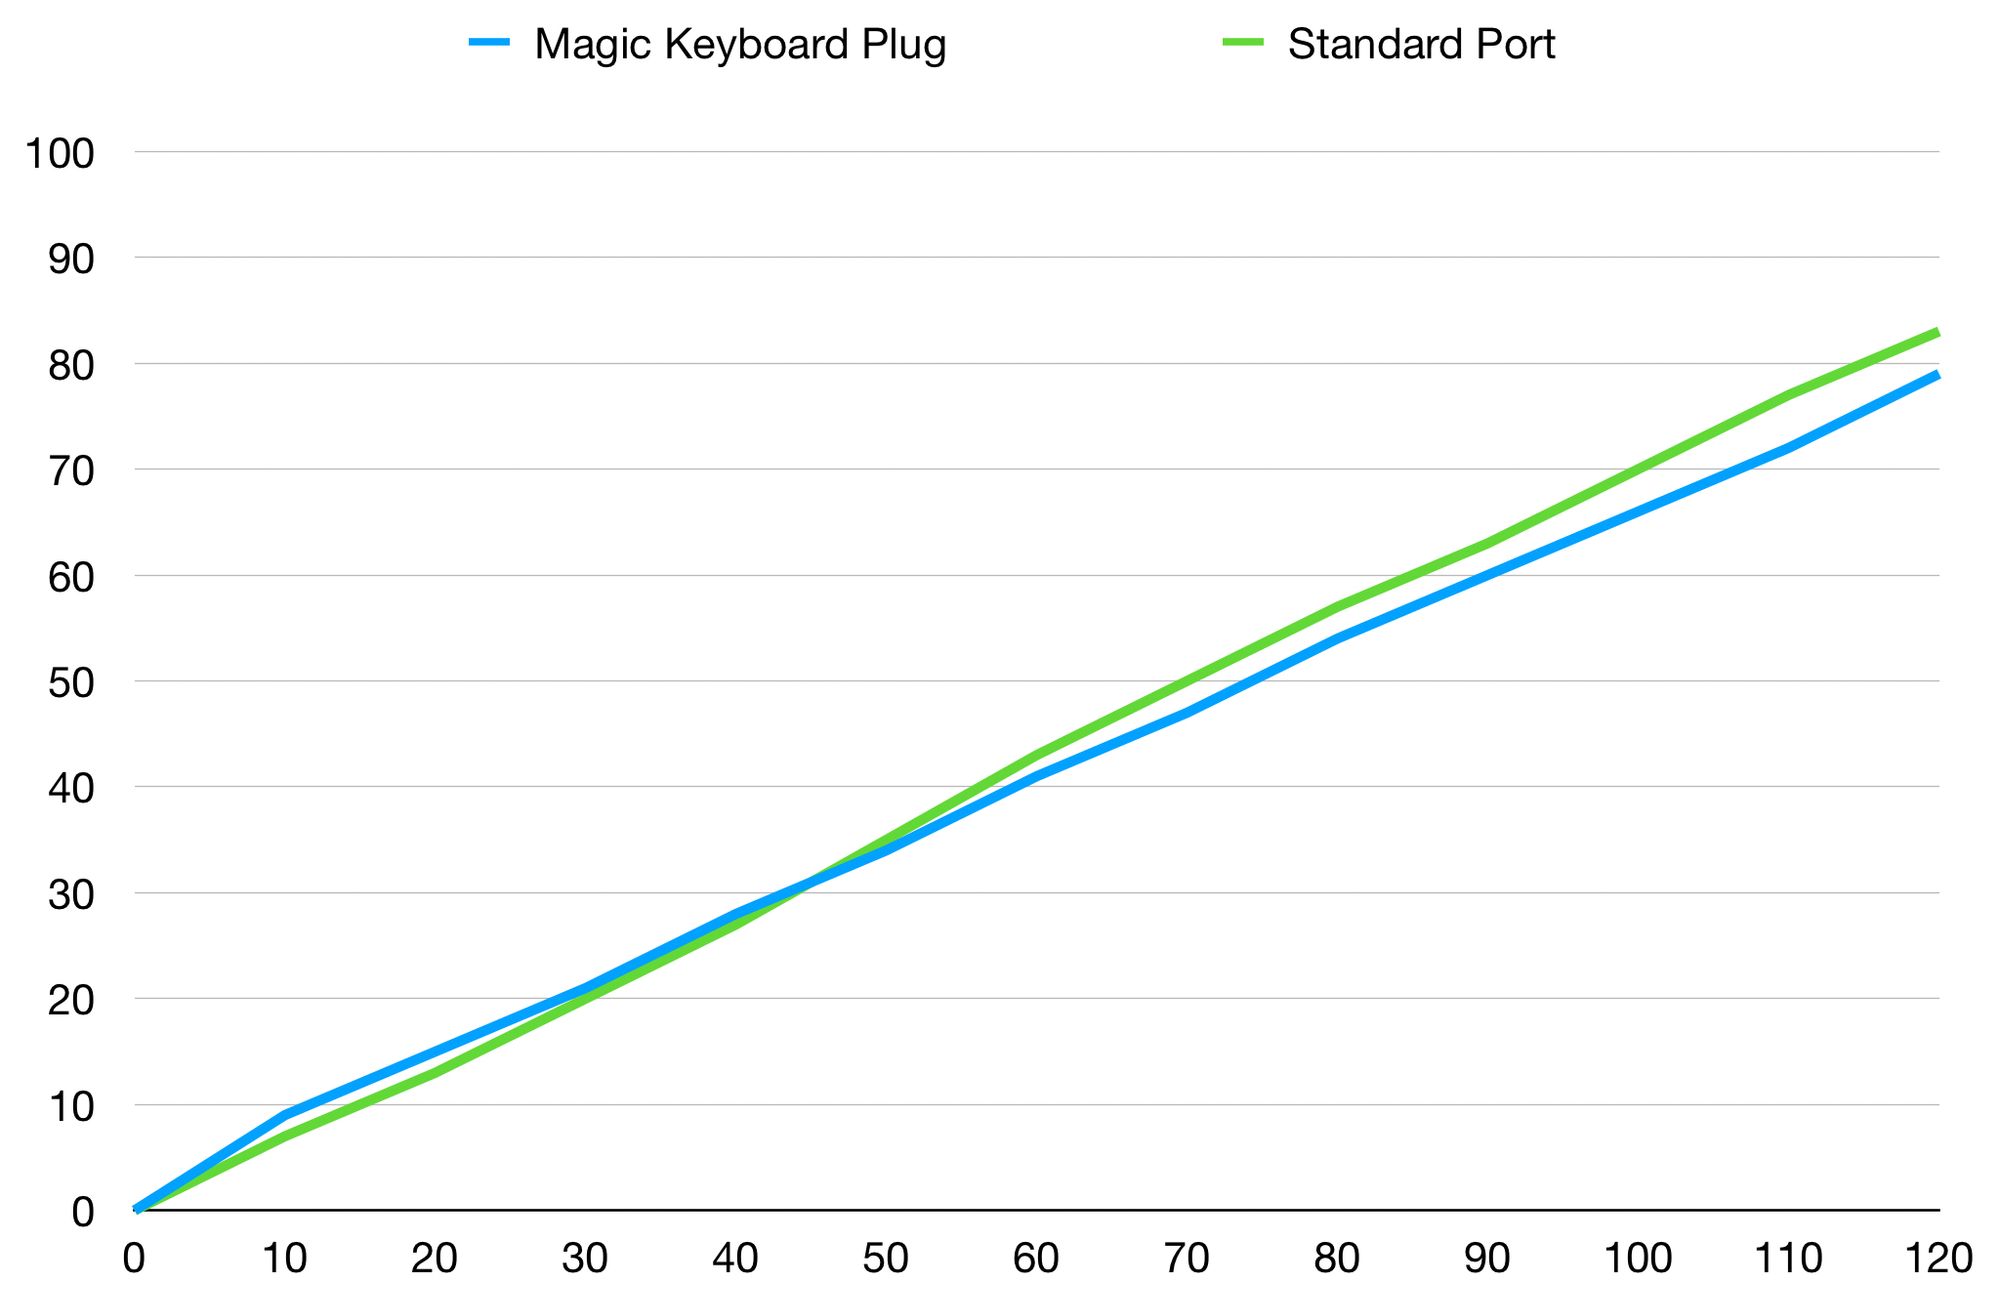 How Fast Does the USB-C Plug on the Magic Keyboard Charge the iPad Pro?